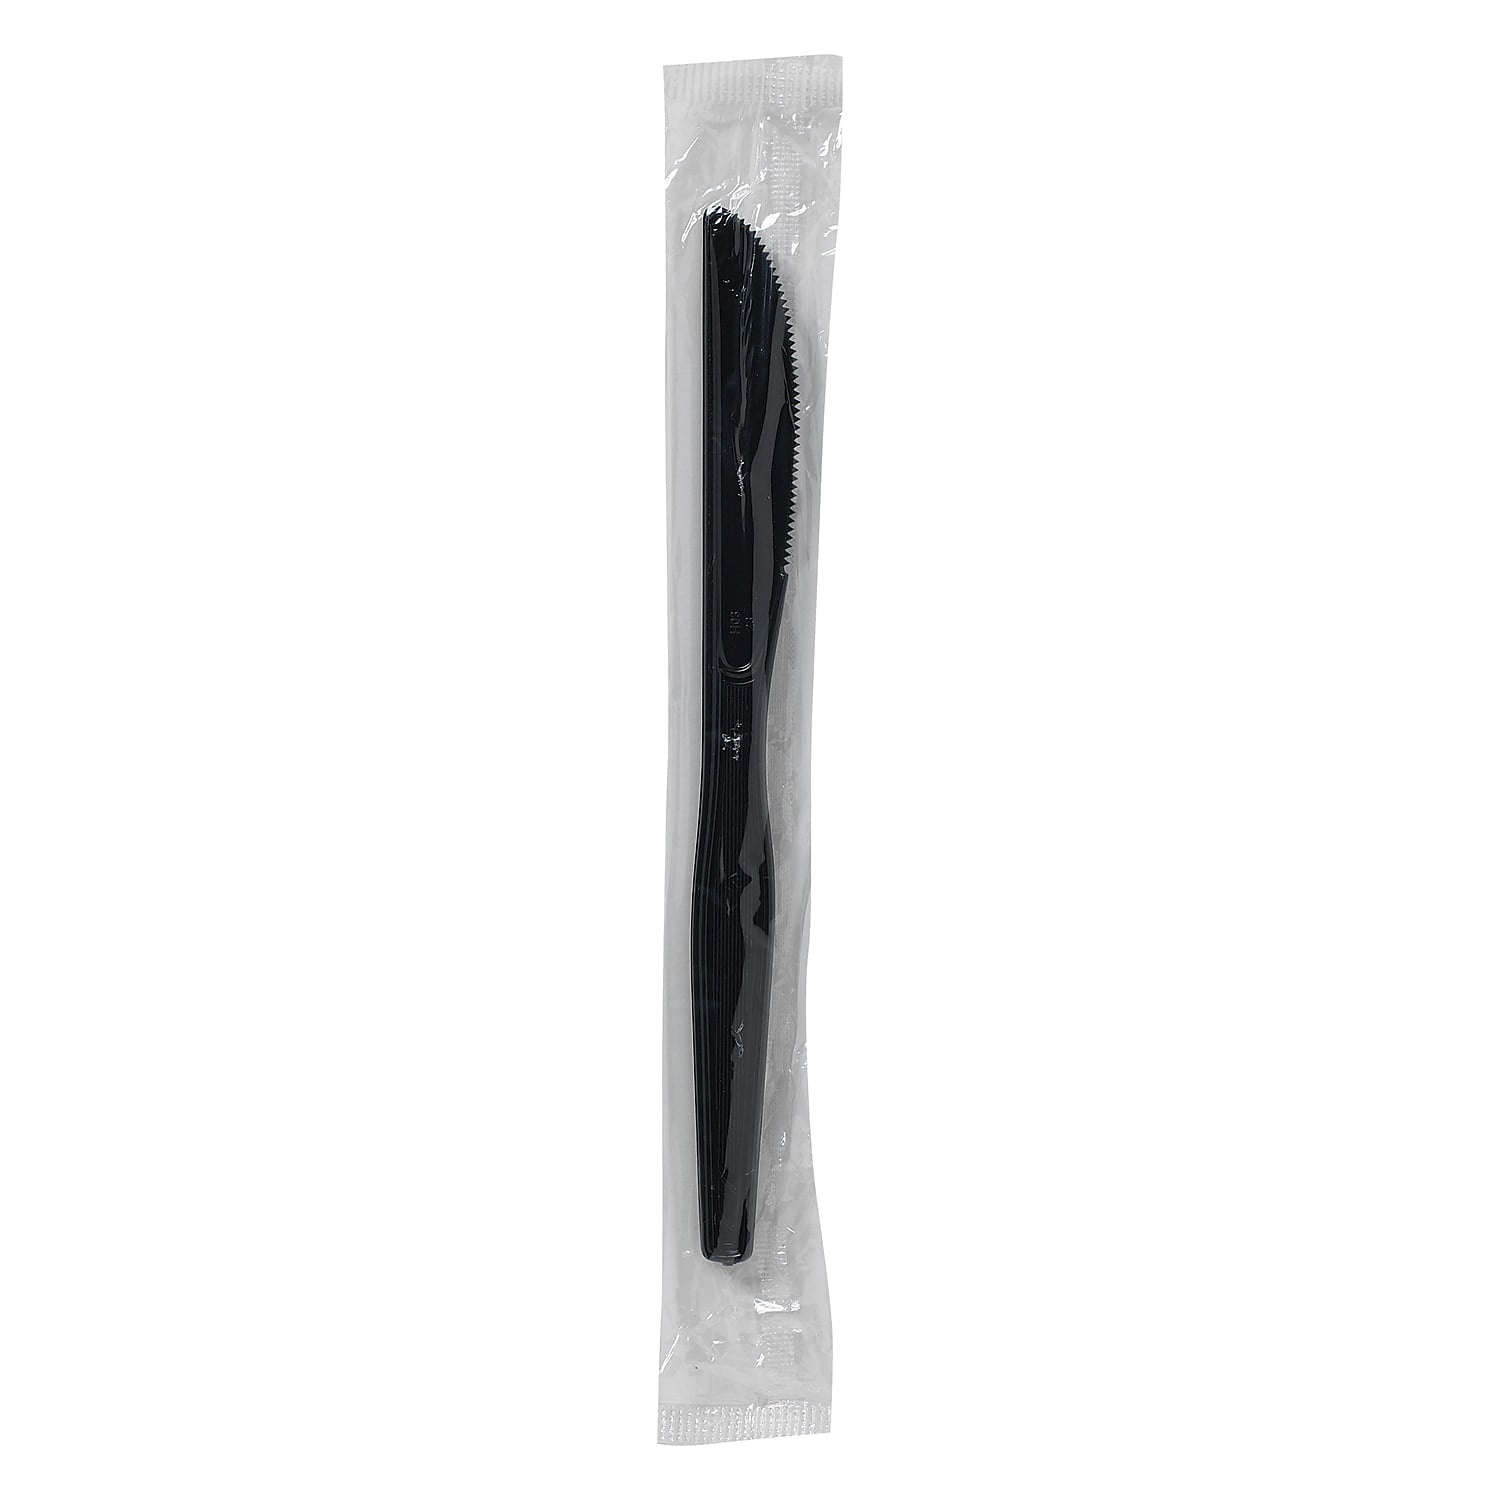 3X Heavy Duty Plastic Knives Individually Wrapped, Sturdy Like Silverware,  100 Pack Black Disposable Plastic Knives Bulk, Packaged To-Go Utensil Set